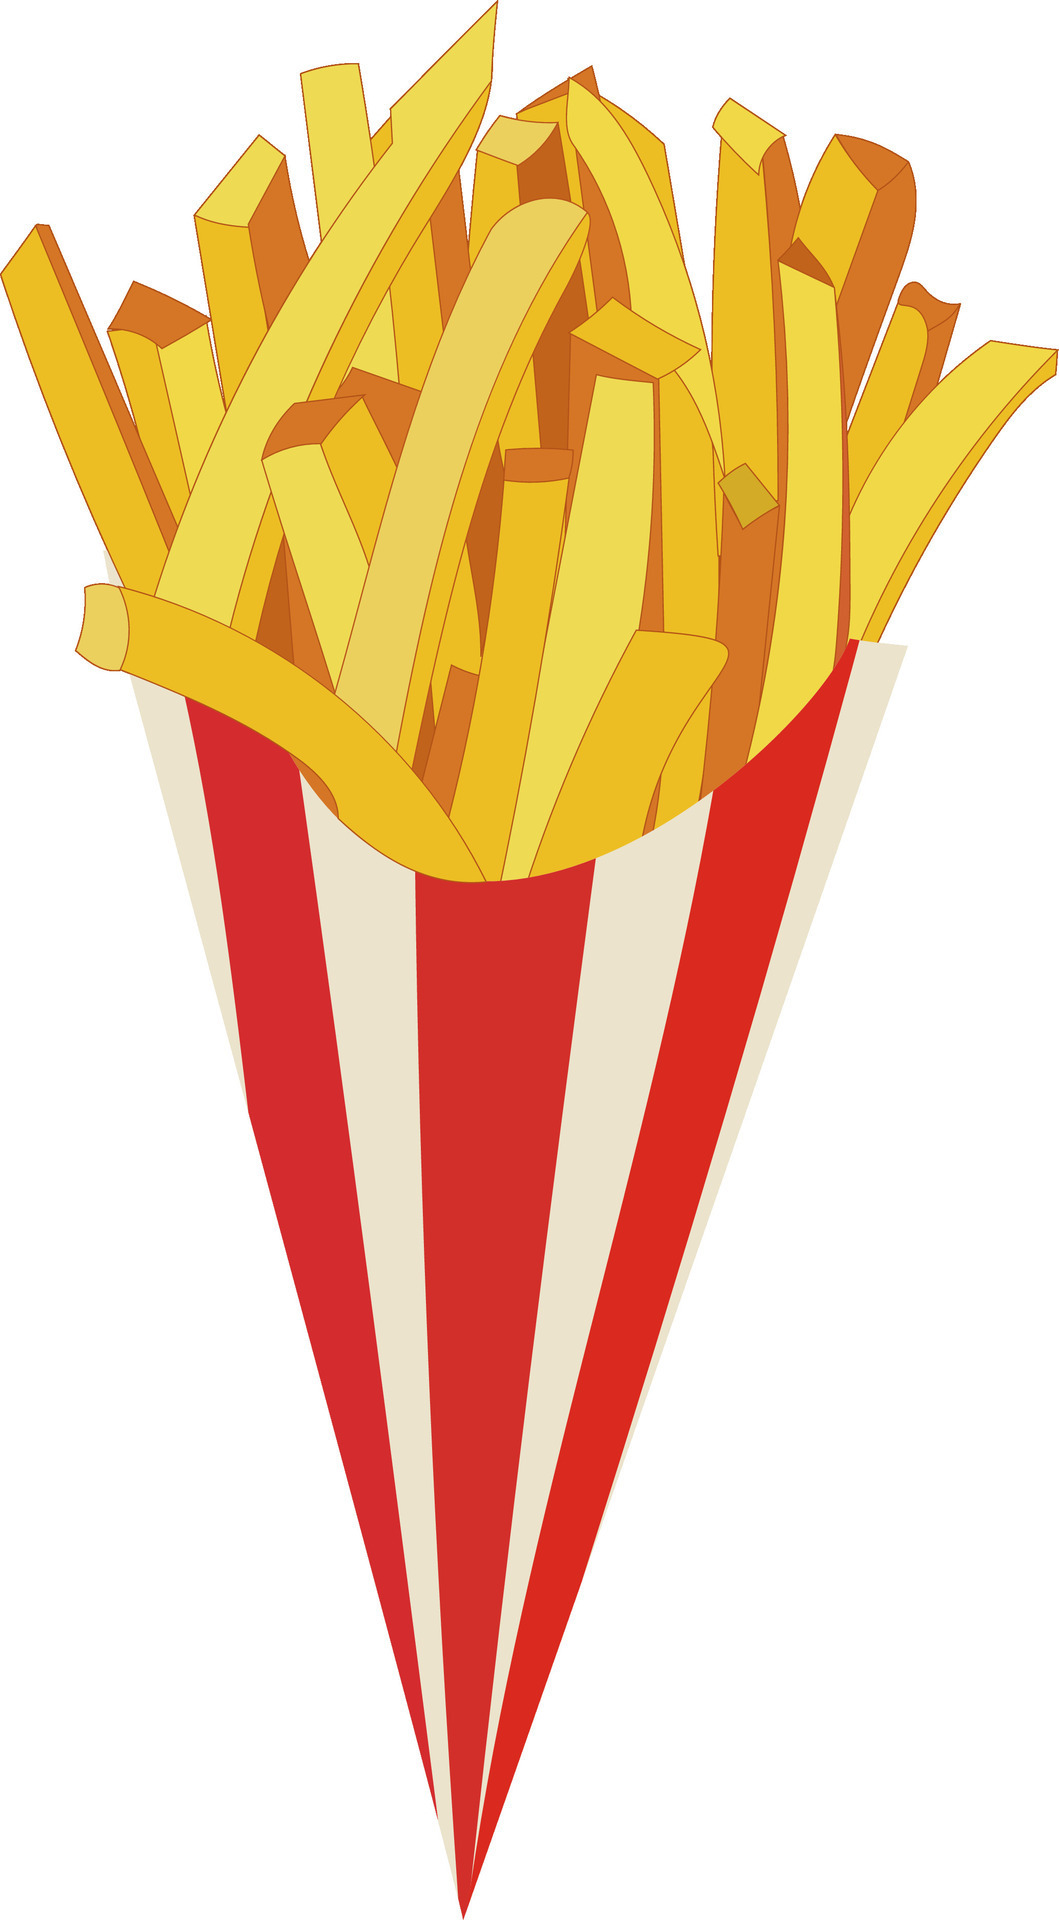 French Fries Set Vector Classic Paper Bag Tasty Fast Food Potato